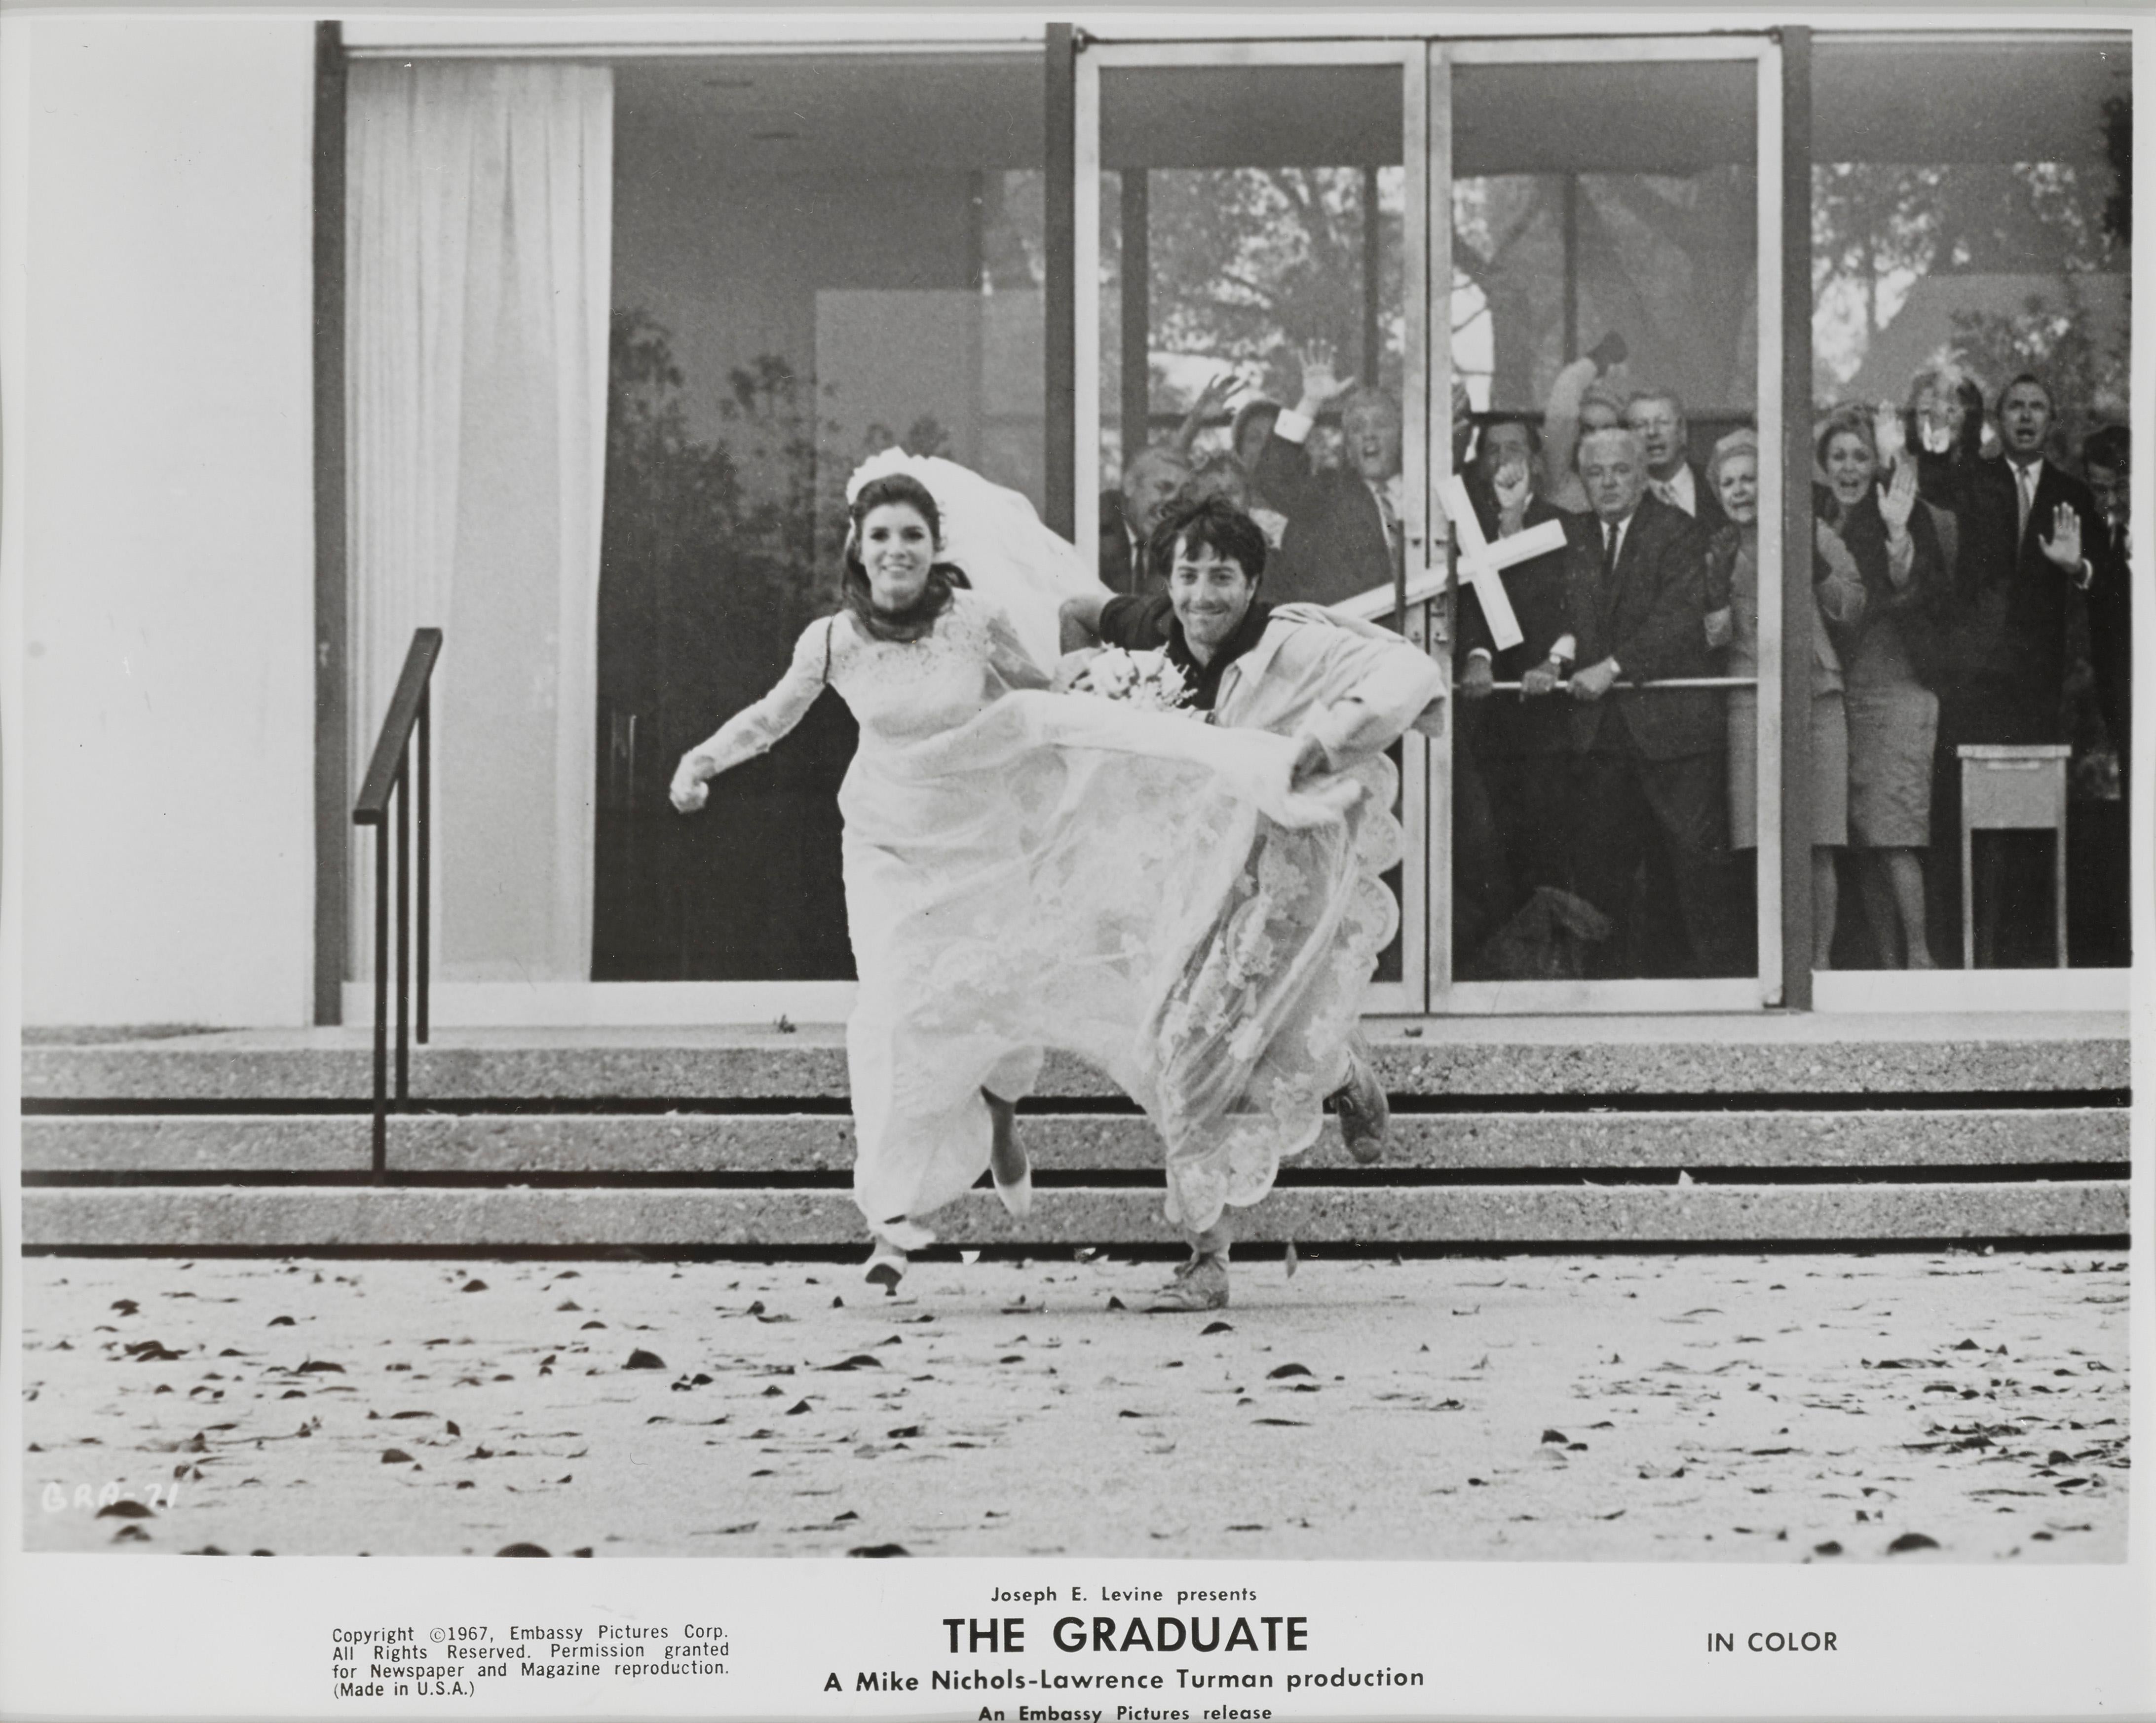 Original US framed production still for Dustin Hoffman, Anne Bancroft, Katherine Ross's 1967 classic drama directed by Mike Nichols. The size given is before framing the farmed size is 15 x 13 1/2 in. (38 x 34.3 cm) This piece conservation framed